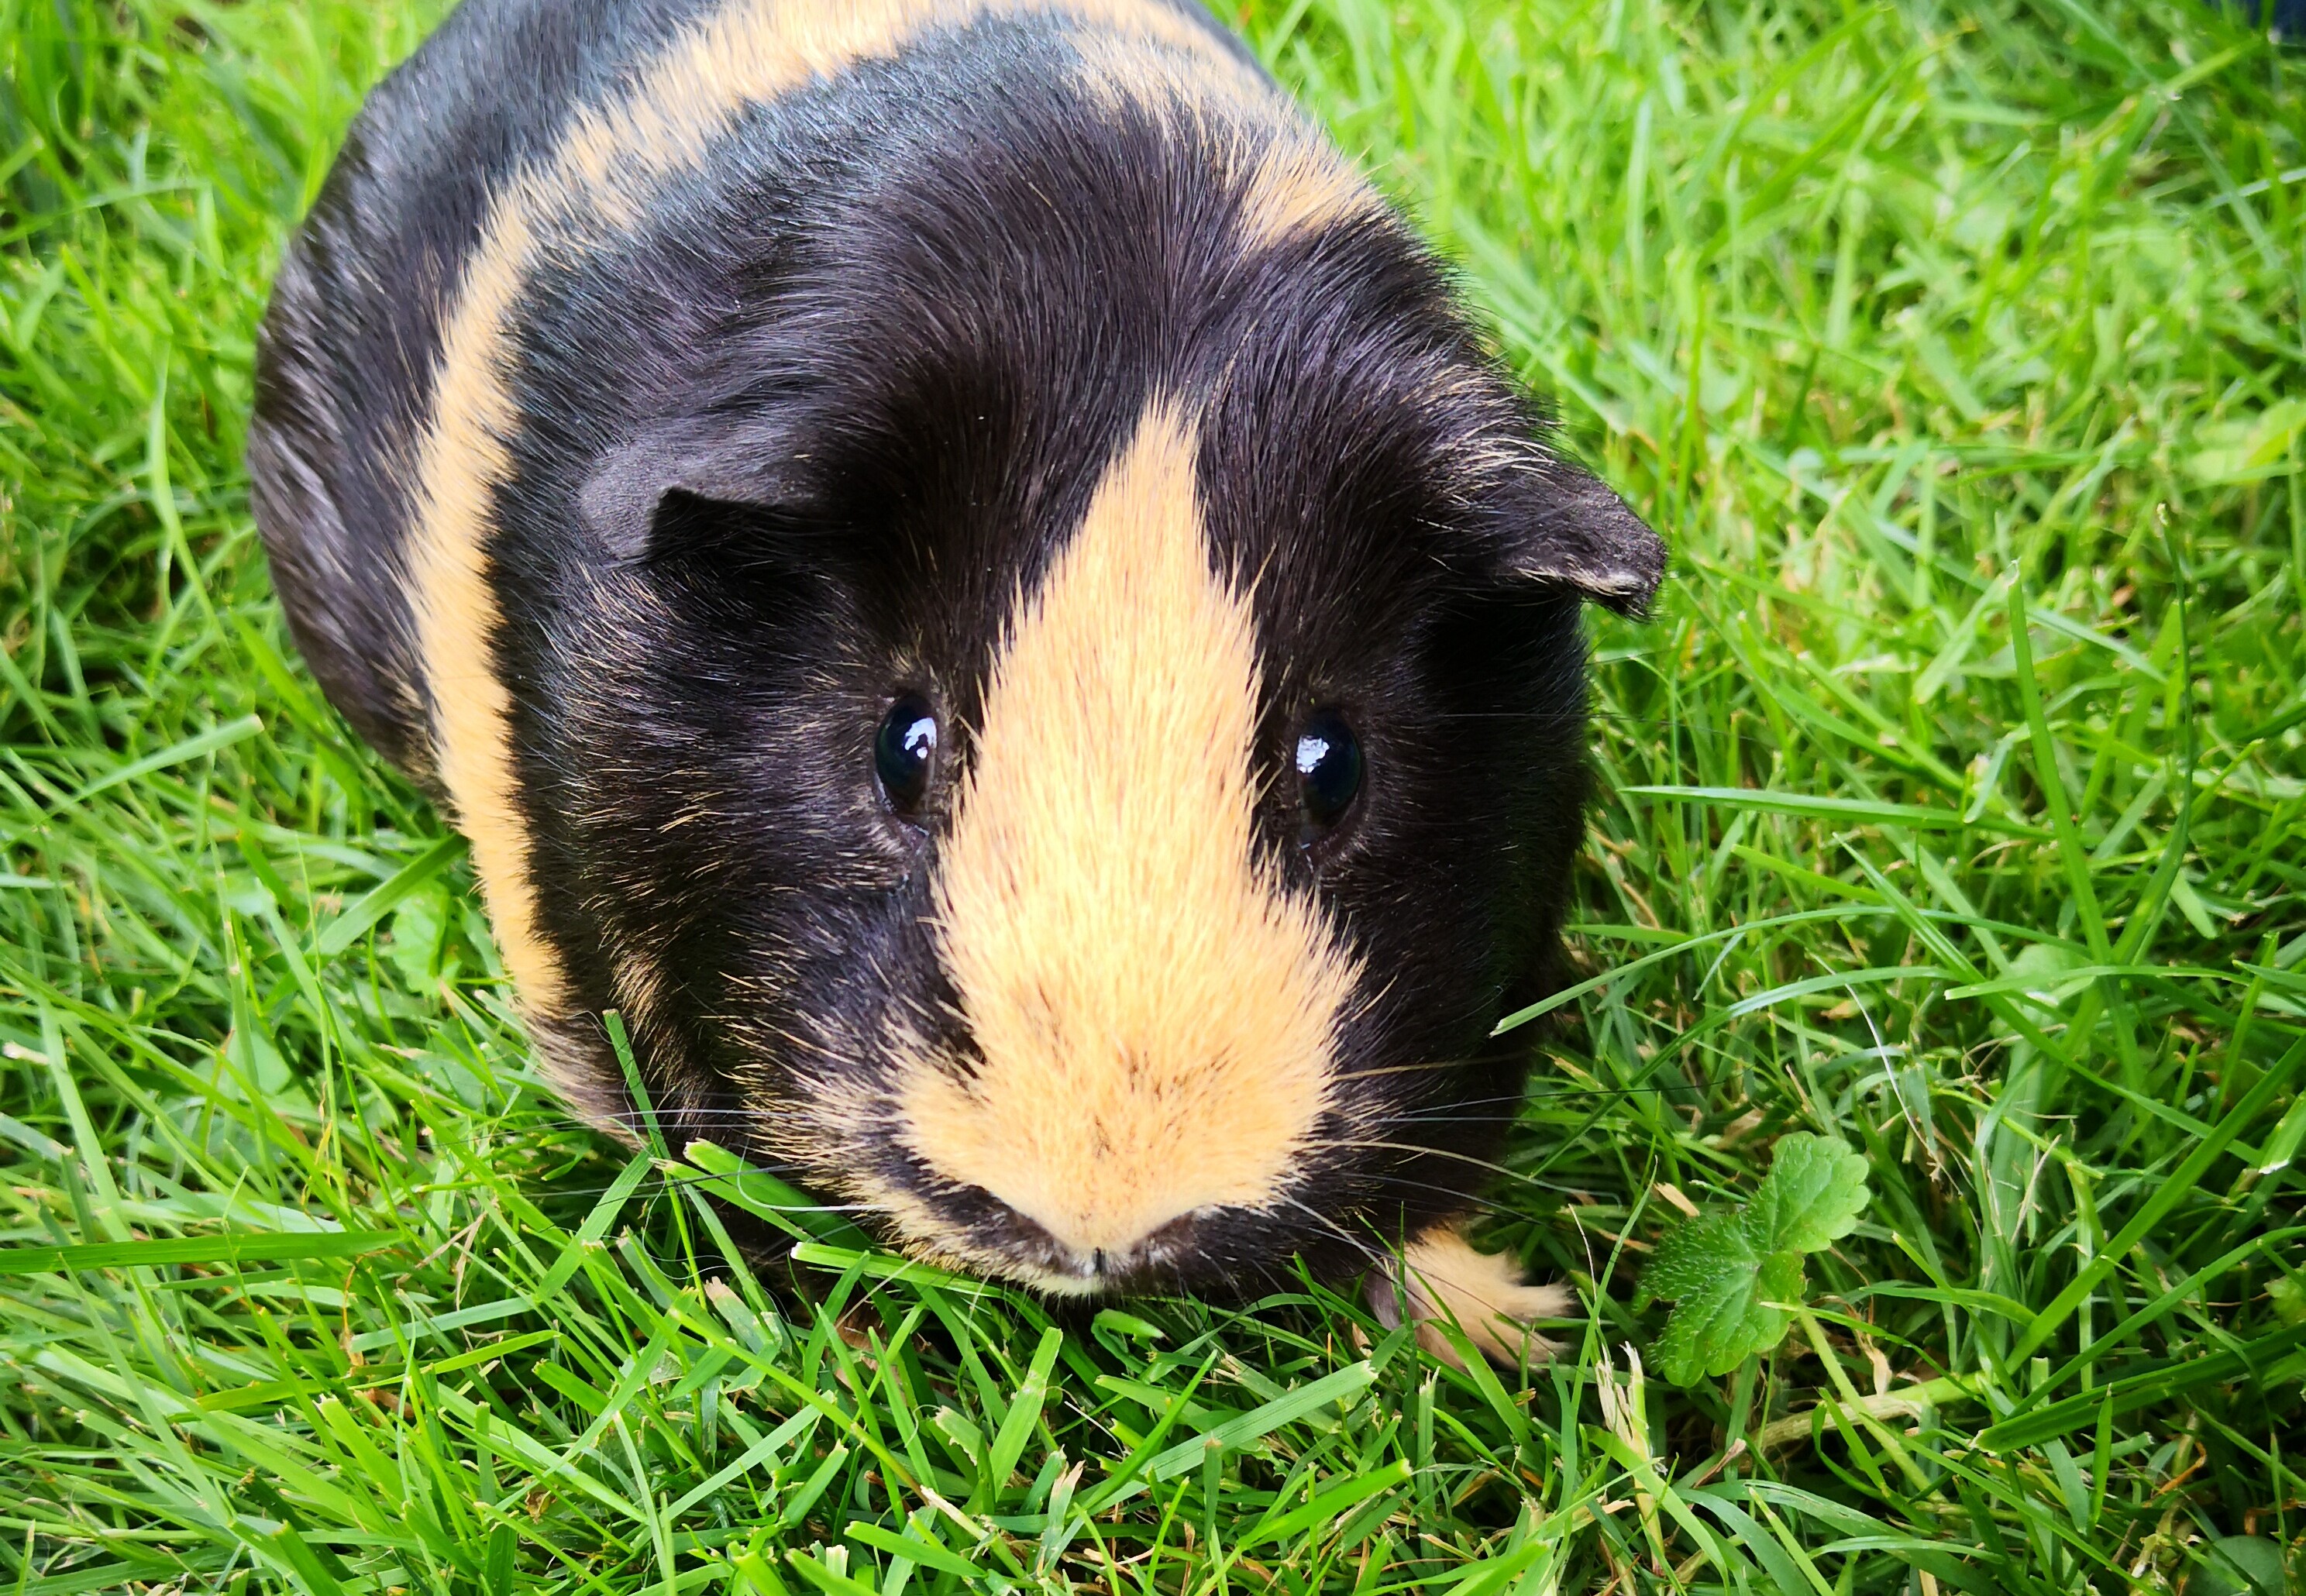 What part of South America do guinea pigs come from?